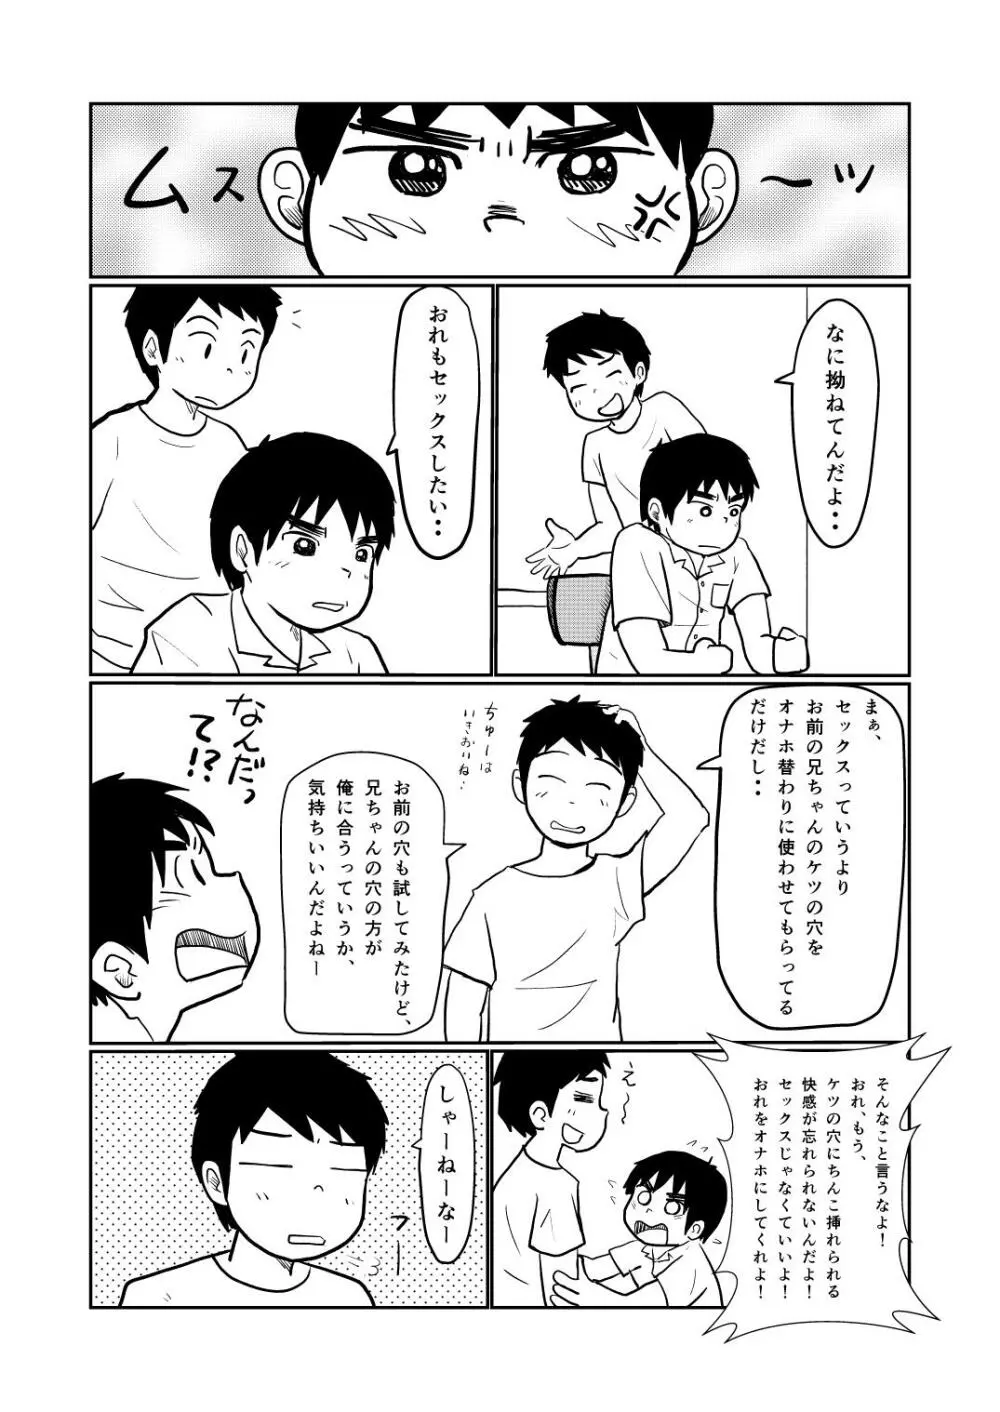 Brothers VS. Brothers 21ページ